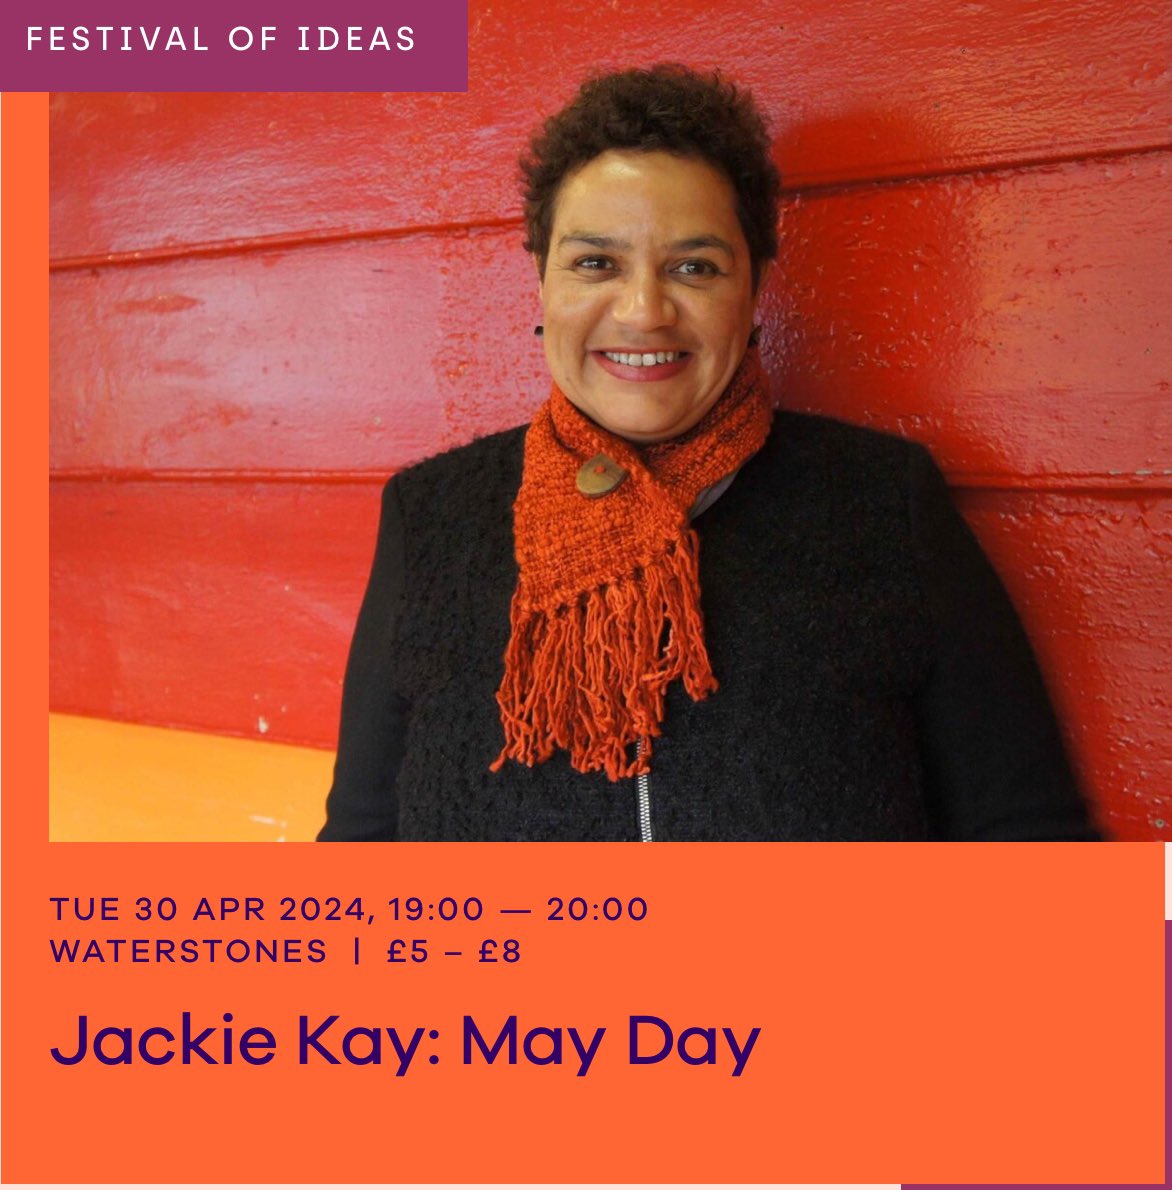 Final day of Bristol Ideas and we go out on a high with Jackie Kay. A great poet, we’re delighted Jackie is with us tonight. bristolideas.co.uk/attend/jackie-… 1/